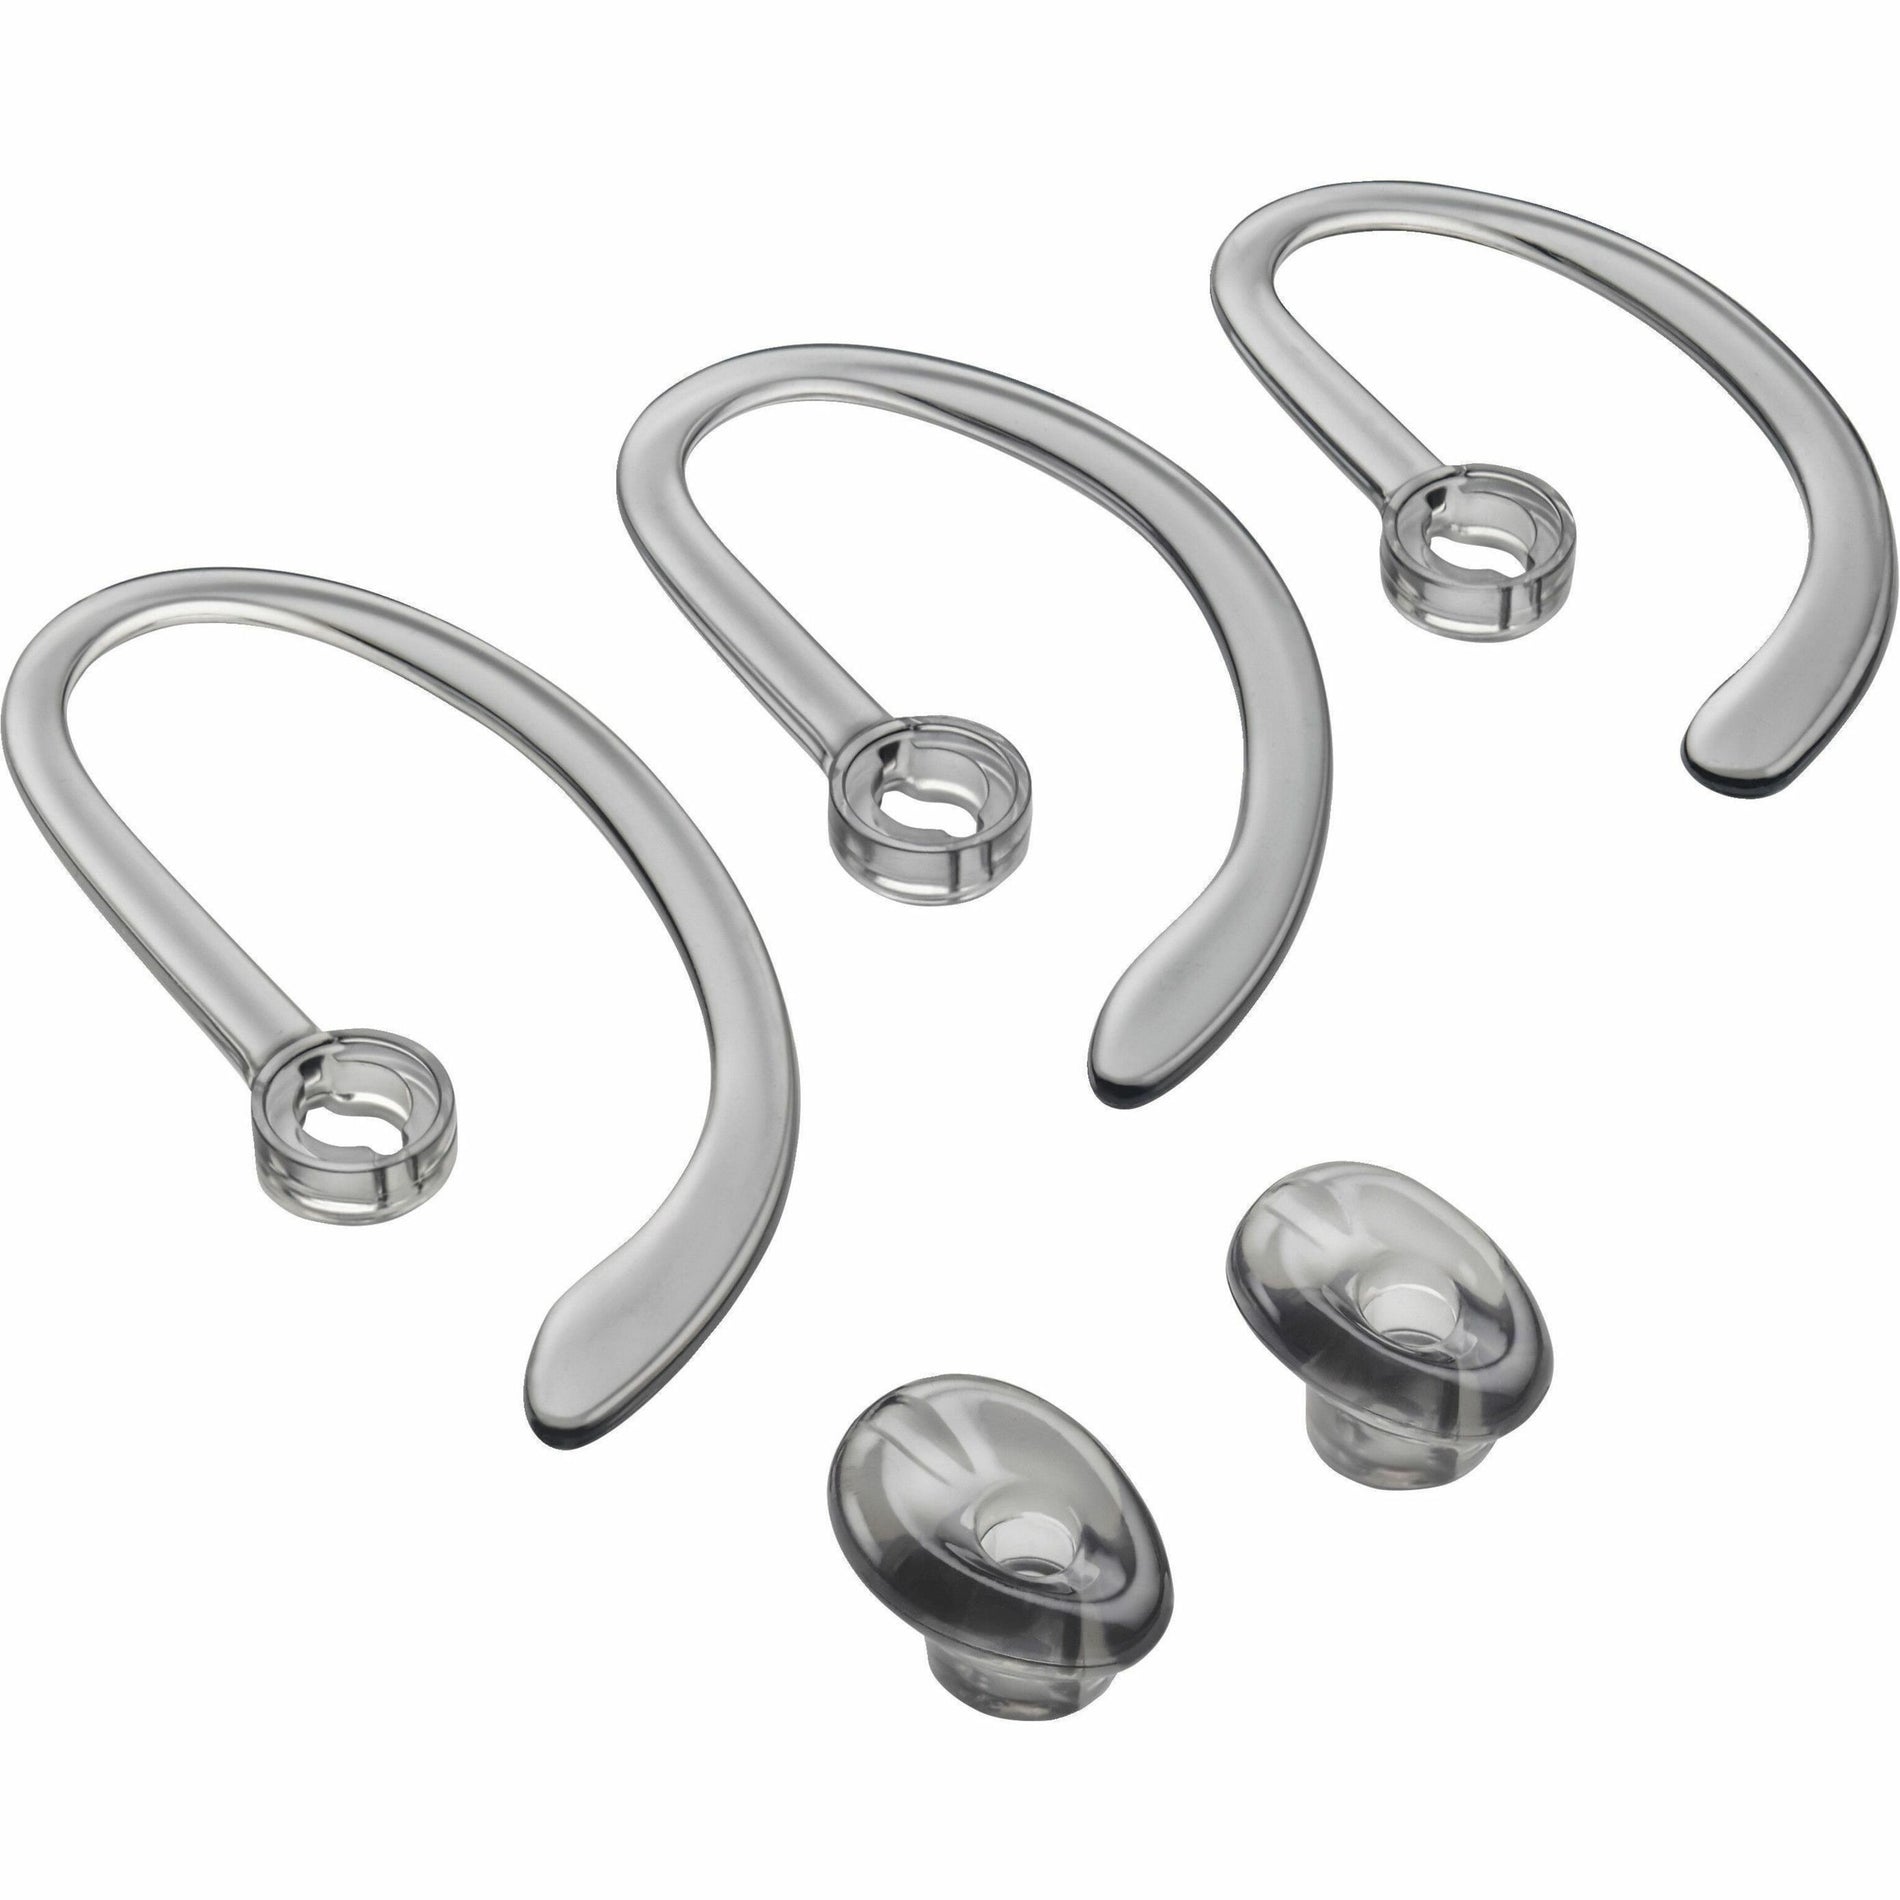 Poly 85Q18AA CS540 Earloops and Earbuds, Compatible with Poly CS540 Earset